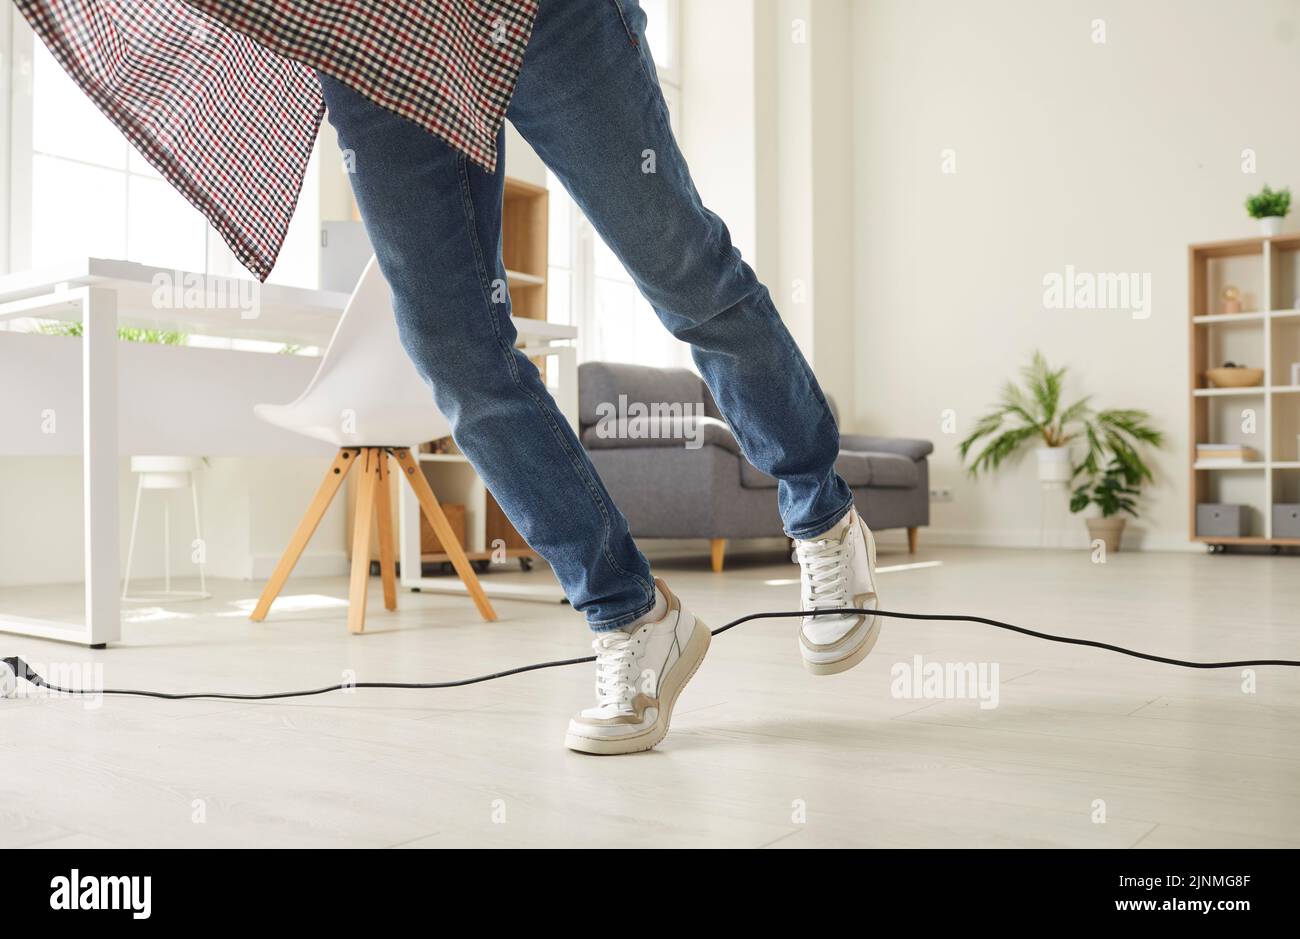 Man falls down as he stumbles over a power cable on the floor in the living room Stock Photo